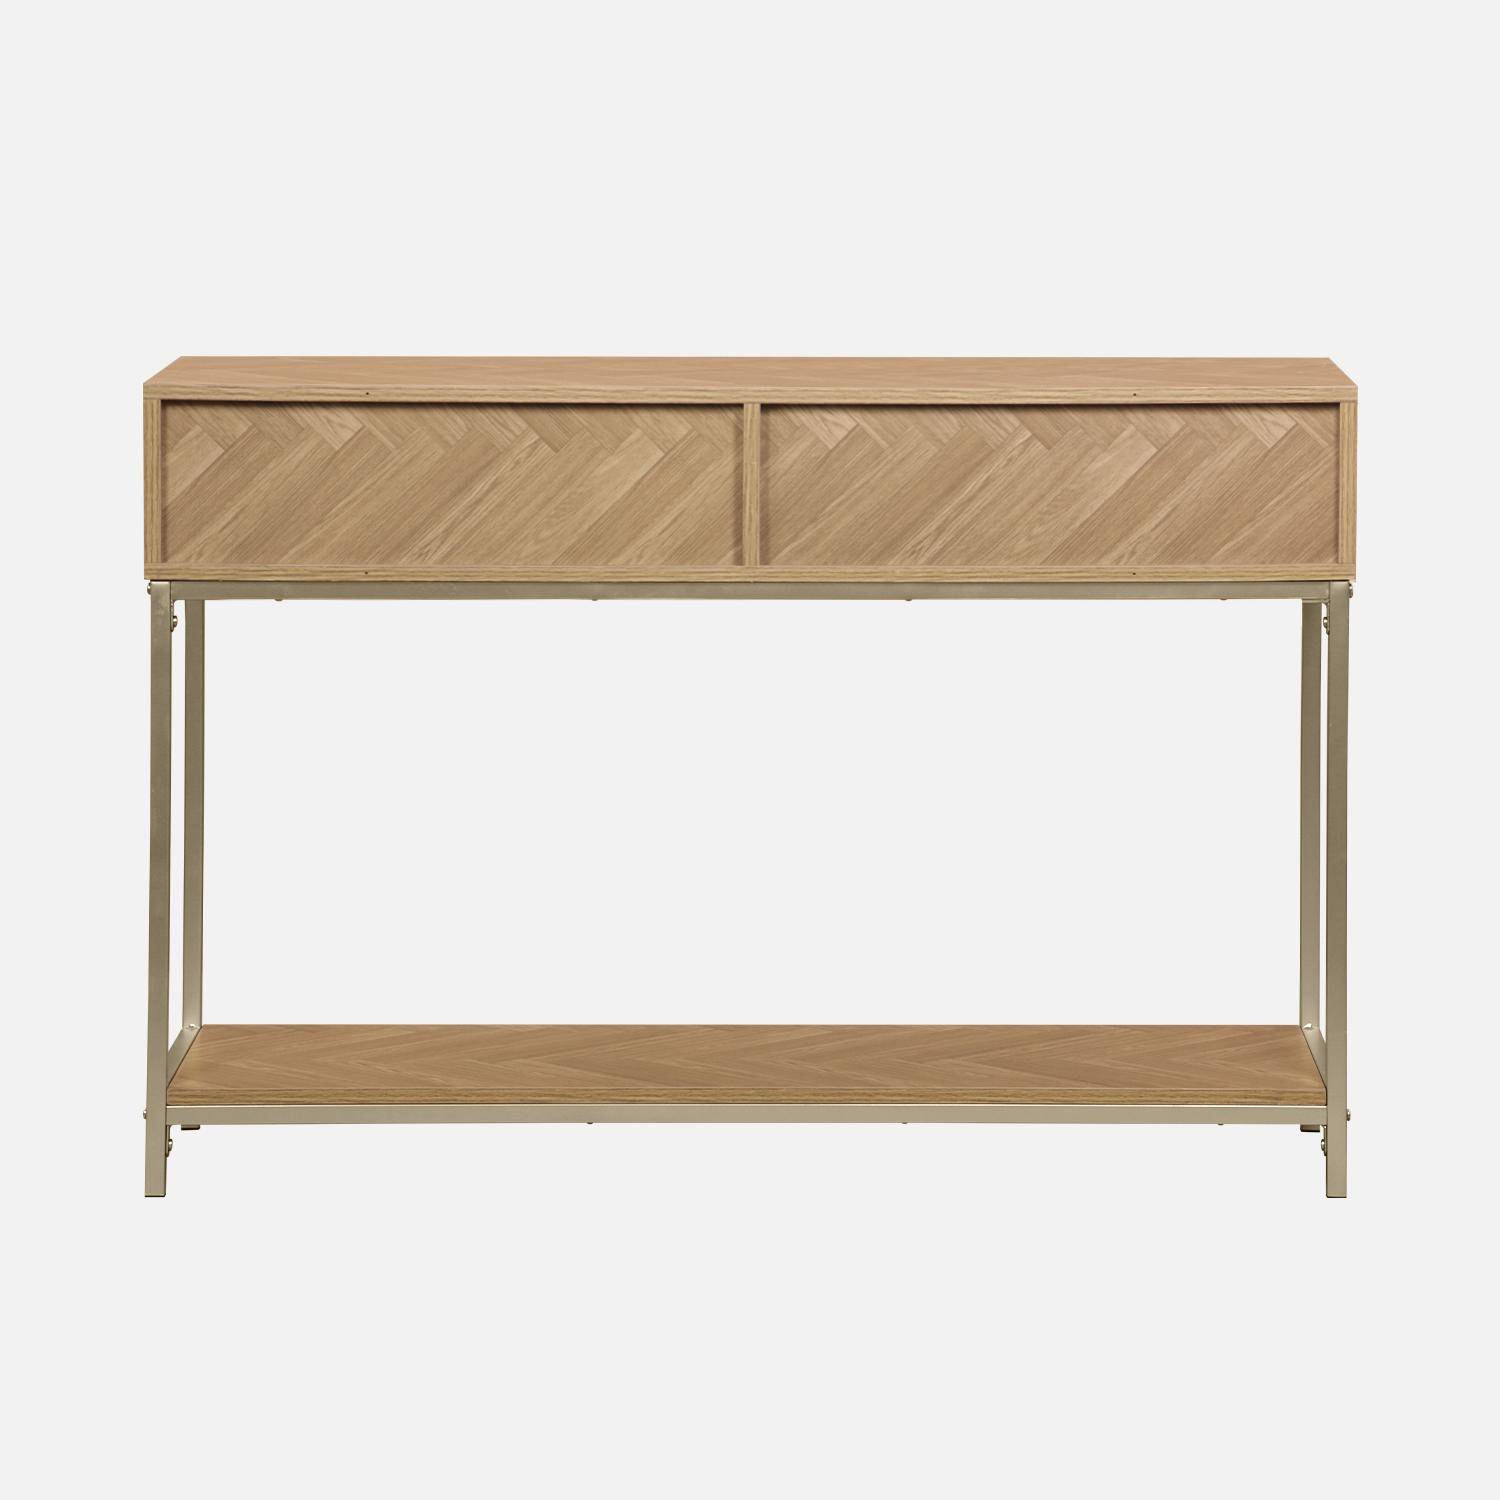 Herringbone hallway console table with 2 drawers, 110x35x75cm - Budapest - Natural Photo7